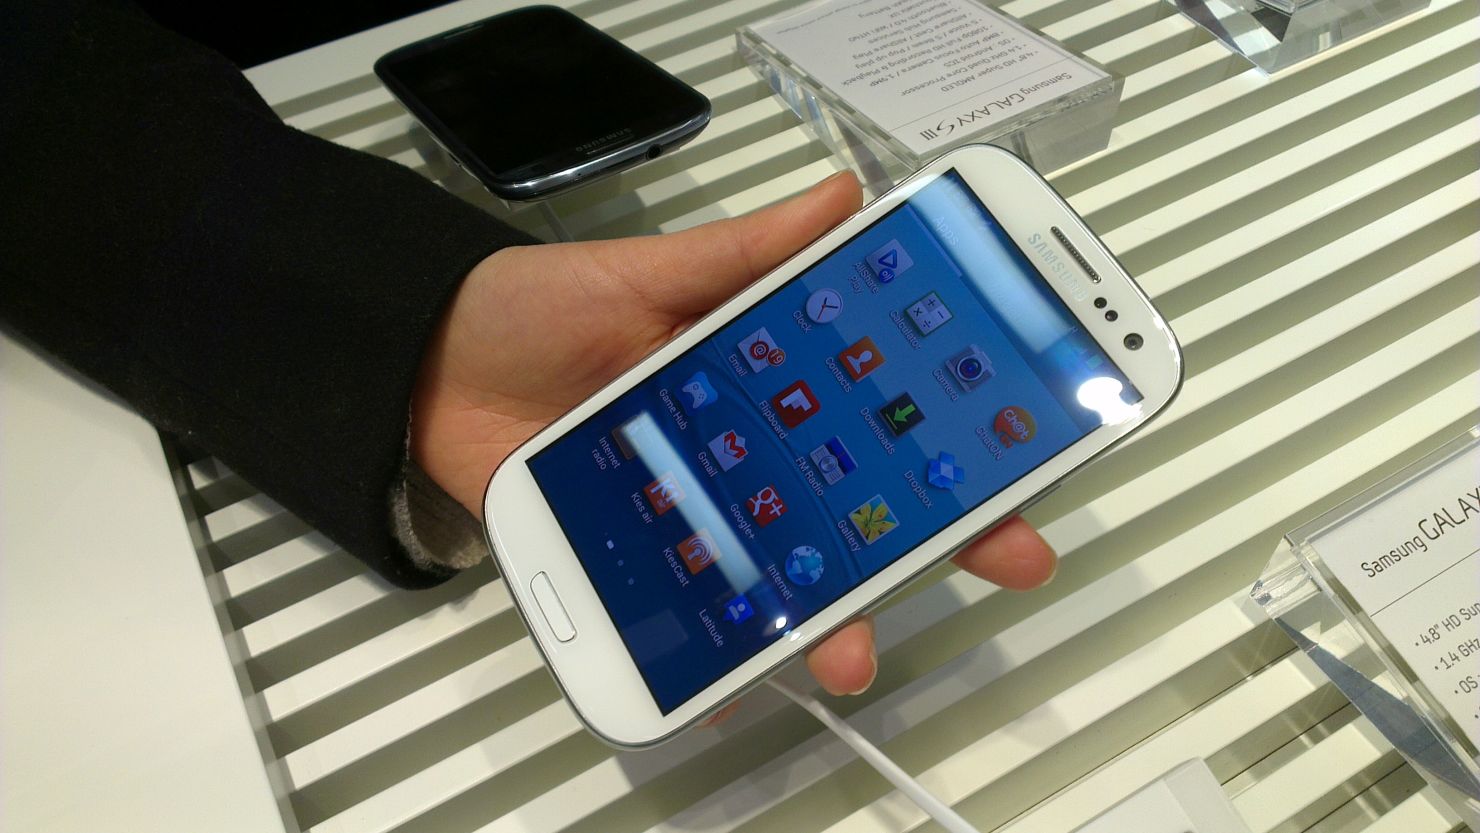 Samsung unveiled its Galaxy S III smartphone in London earlier this month.